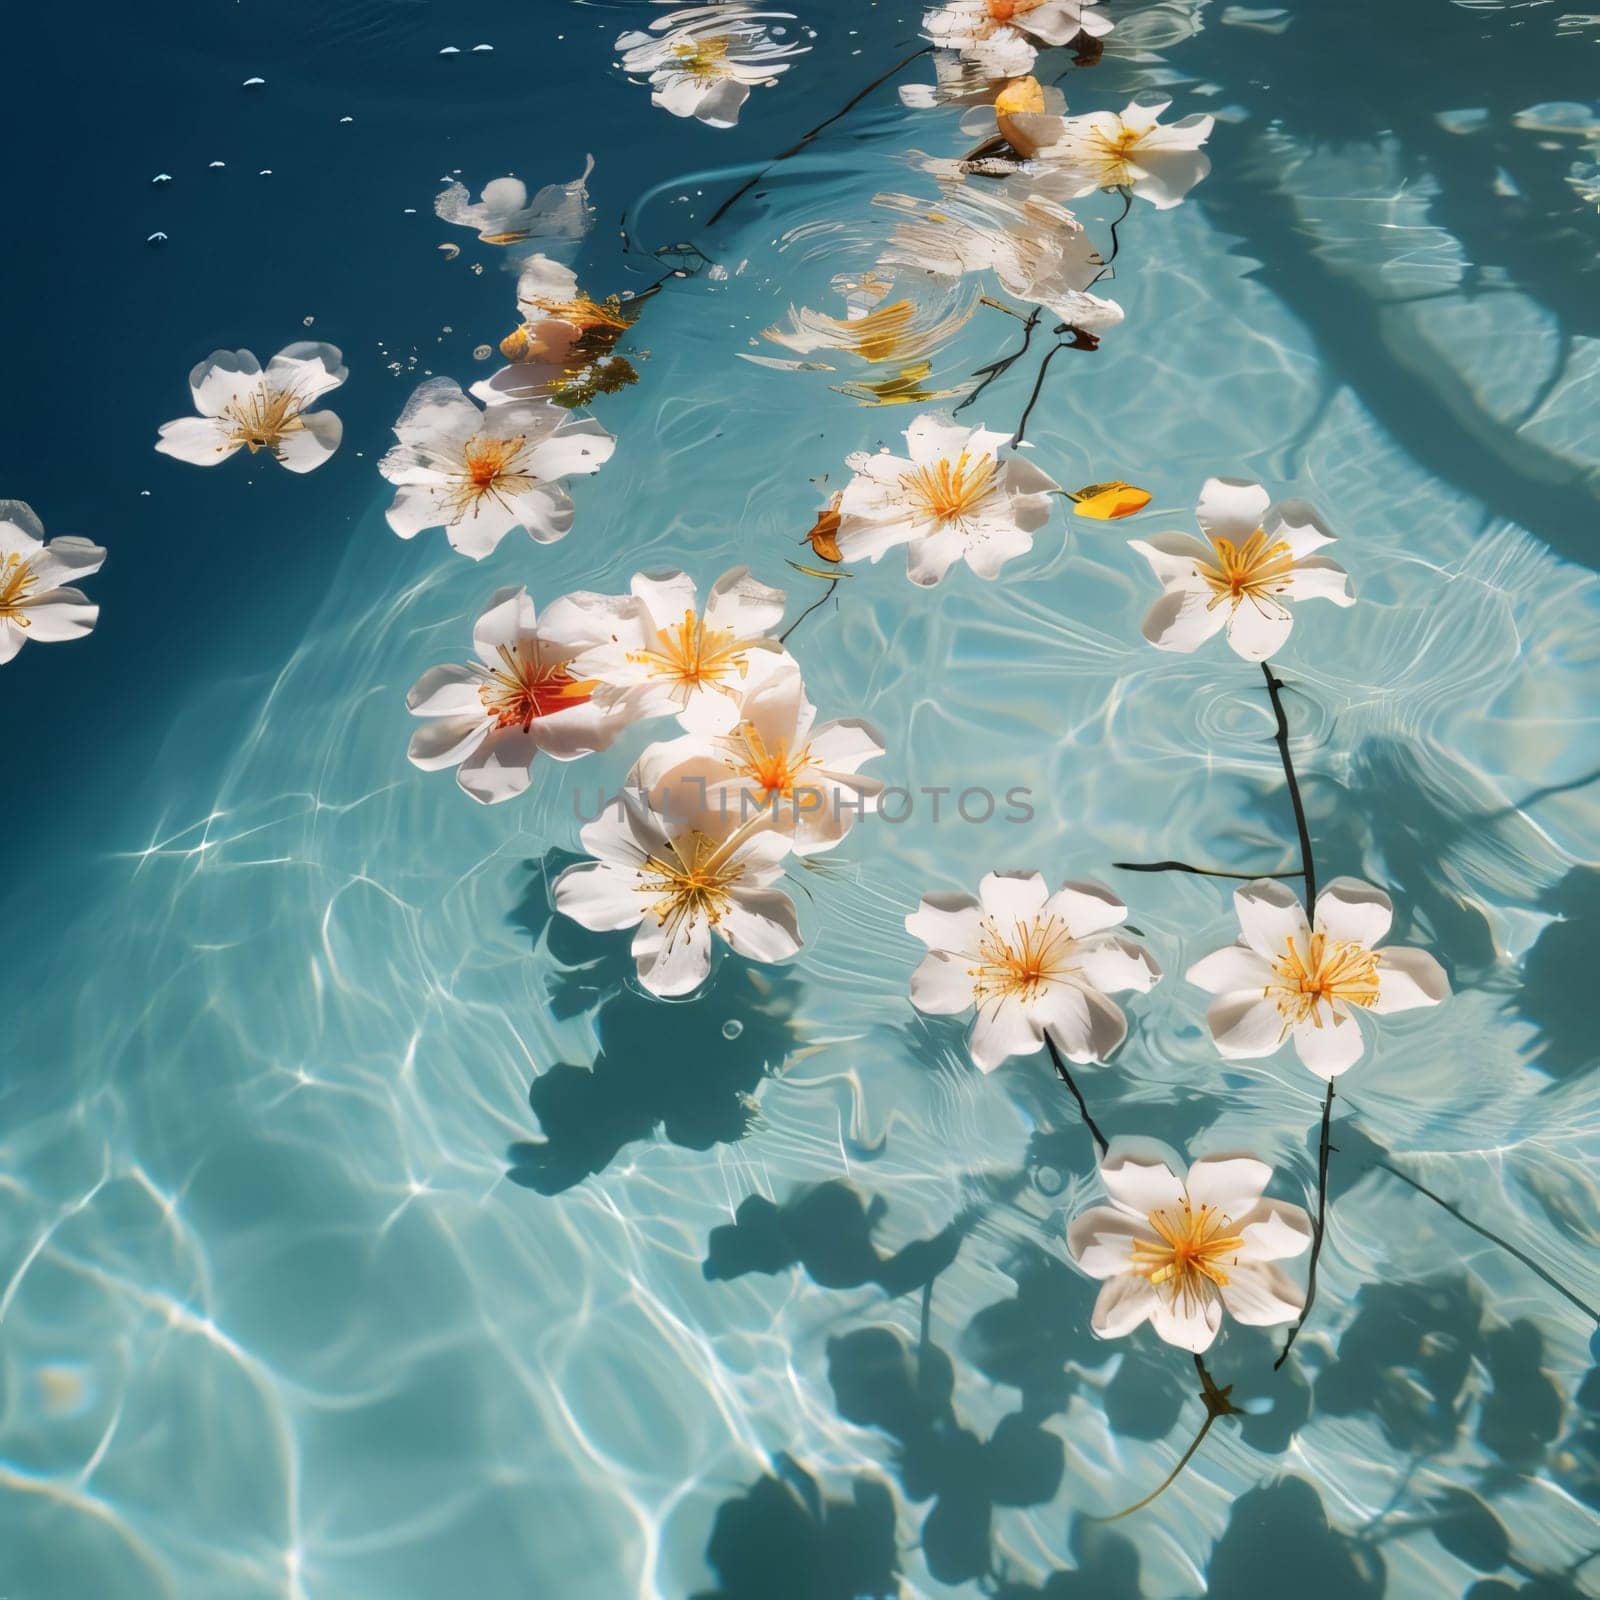 White cherry blossoms floating on the water in the pool. Flowering flowers, a symbol of spring, new life. A joyful time of nature waking up to life.